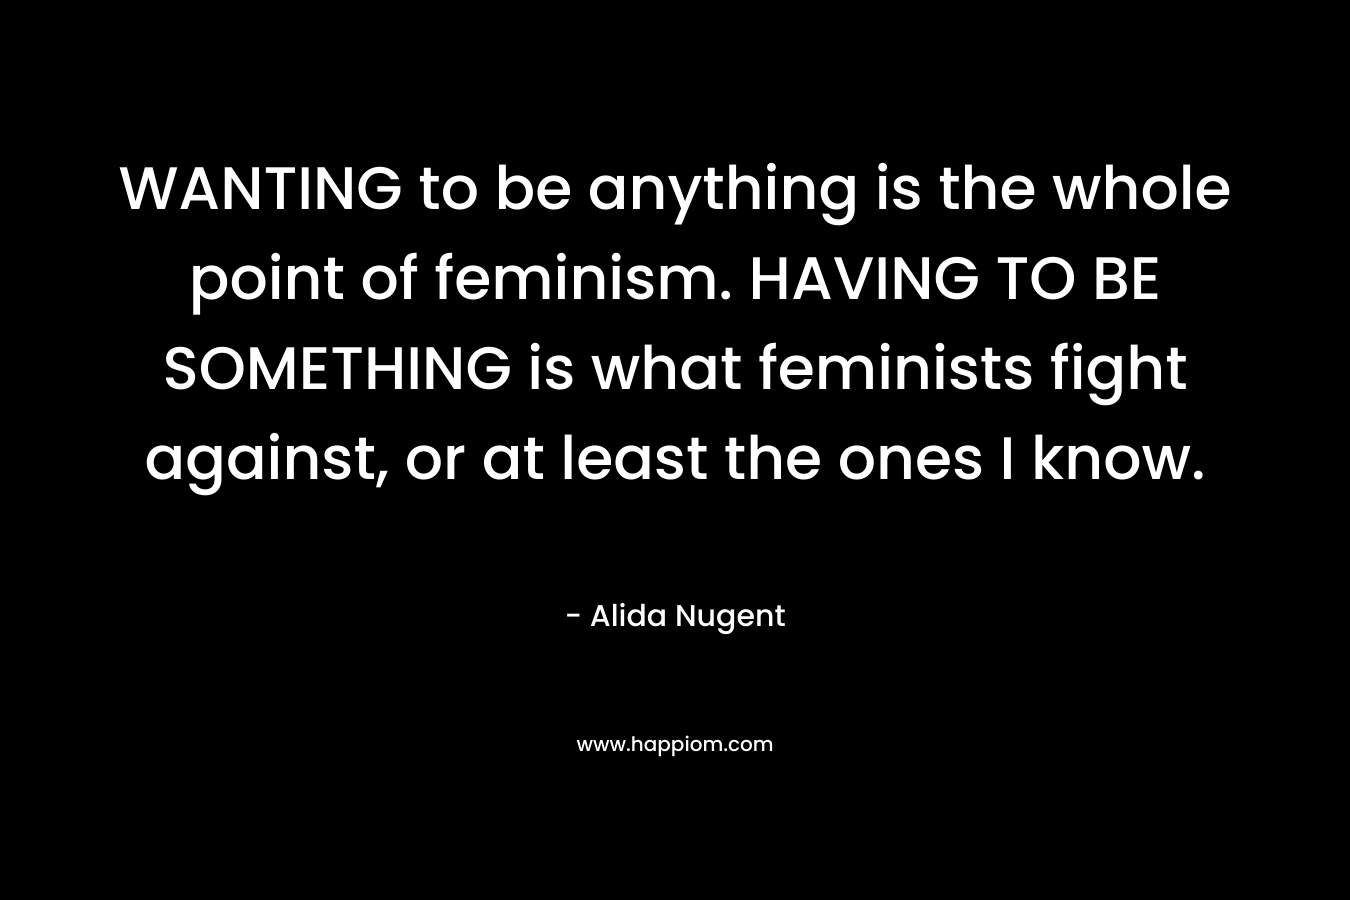 WANTING to be anything is the whole point of feminism. HAVING TO BE SOMETHING is what feminists fight against, or at least the ones I know.